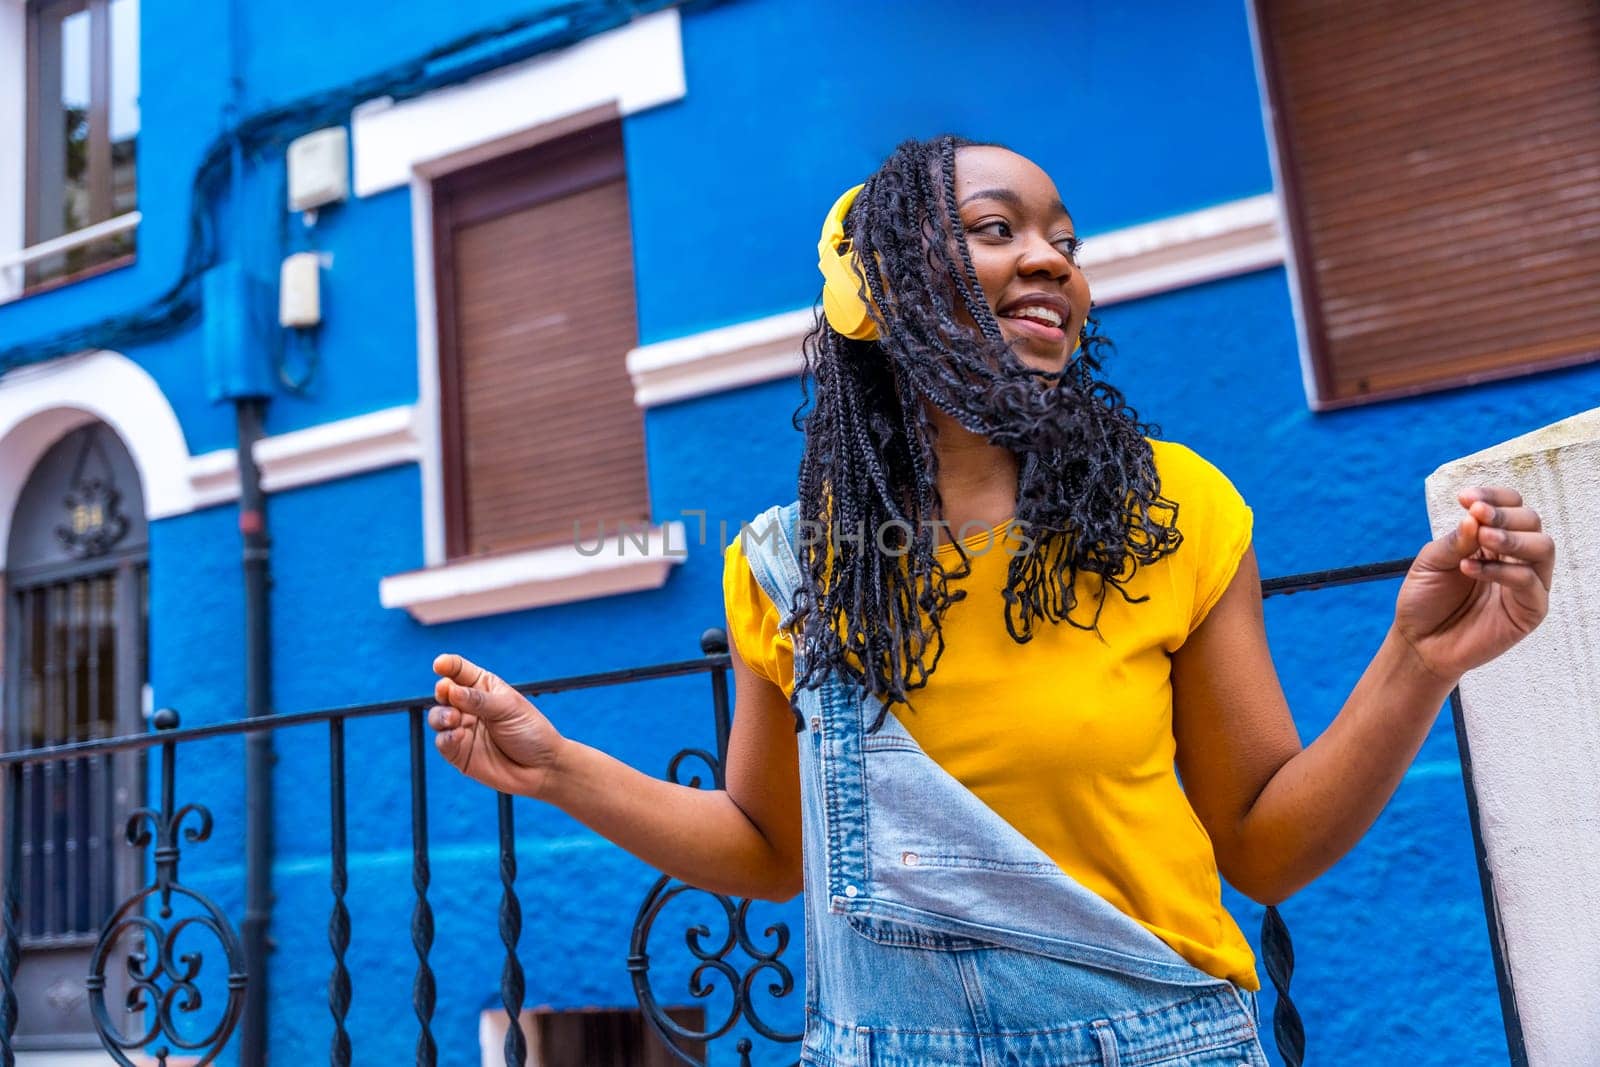 Cool casual african woman with braided hair dancing listening to music with headphones outdoors next to a blue house